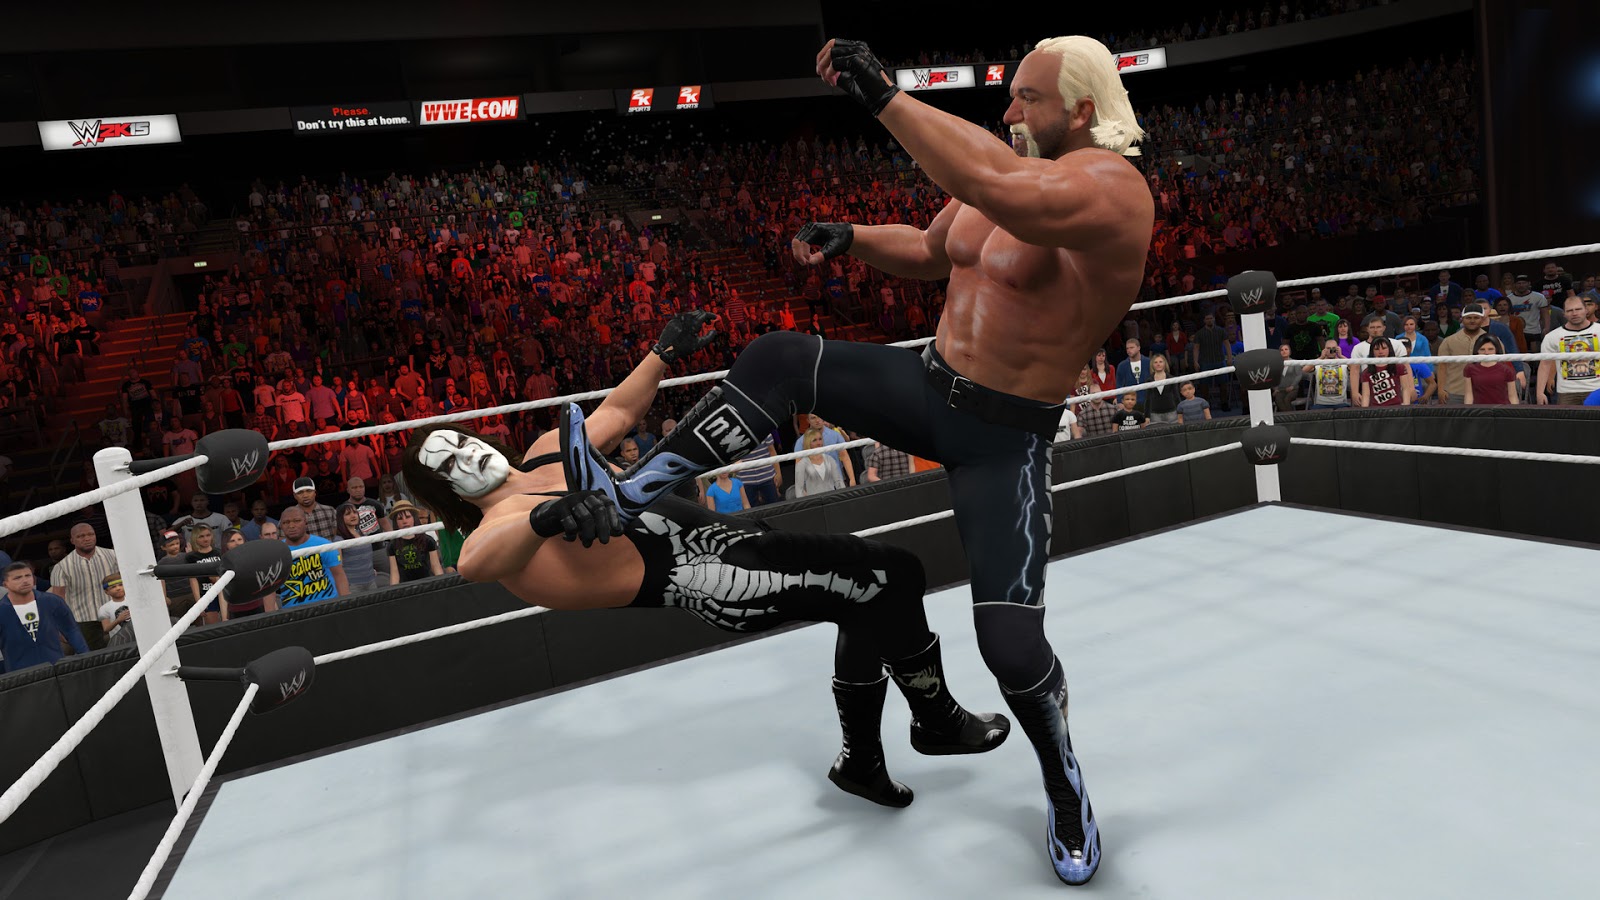 Wwe game download pc torrent